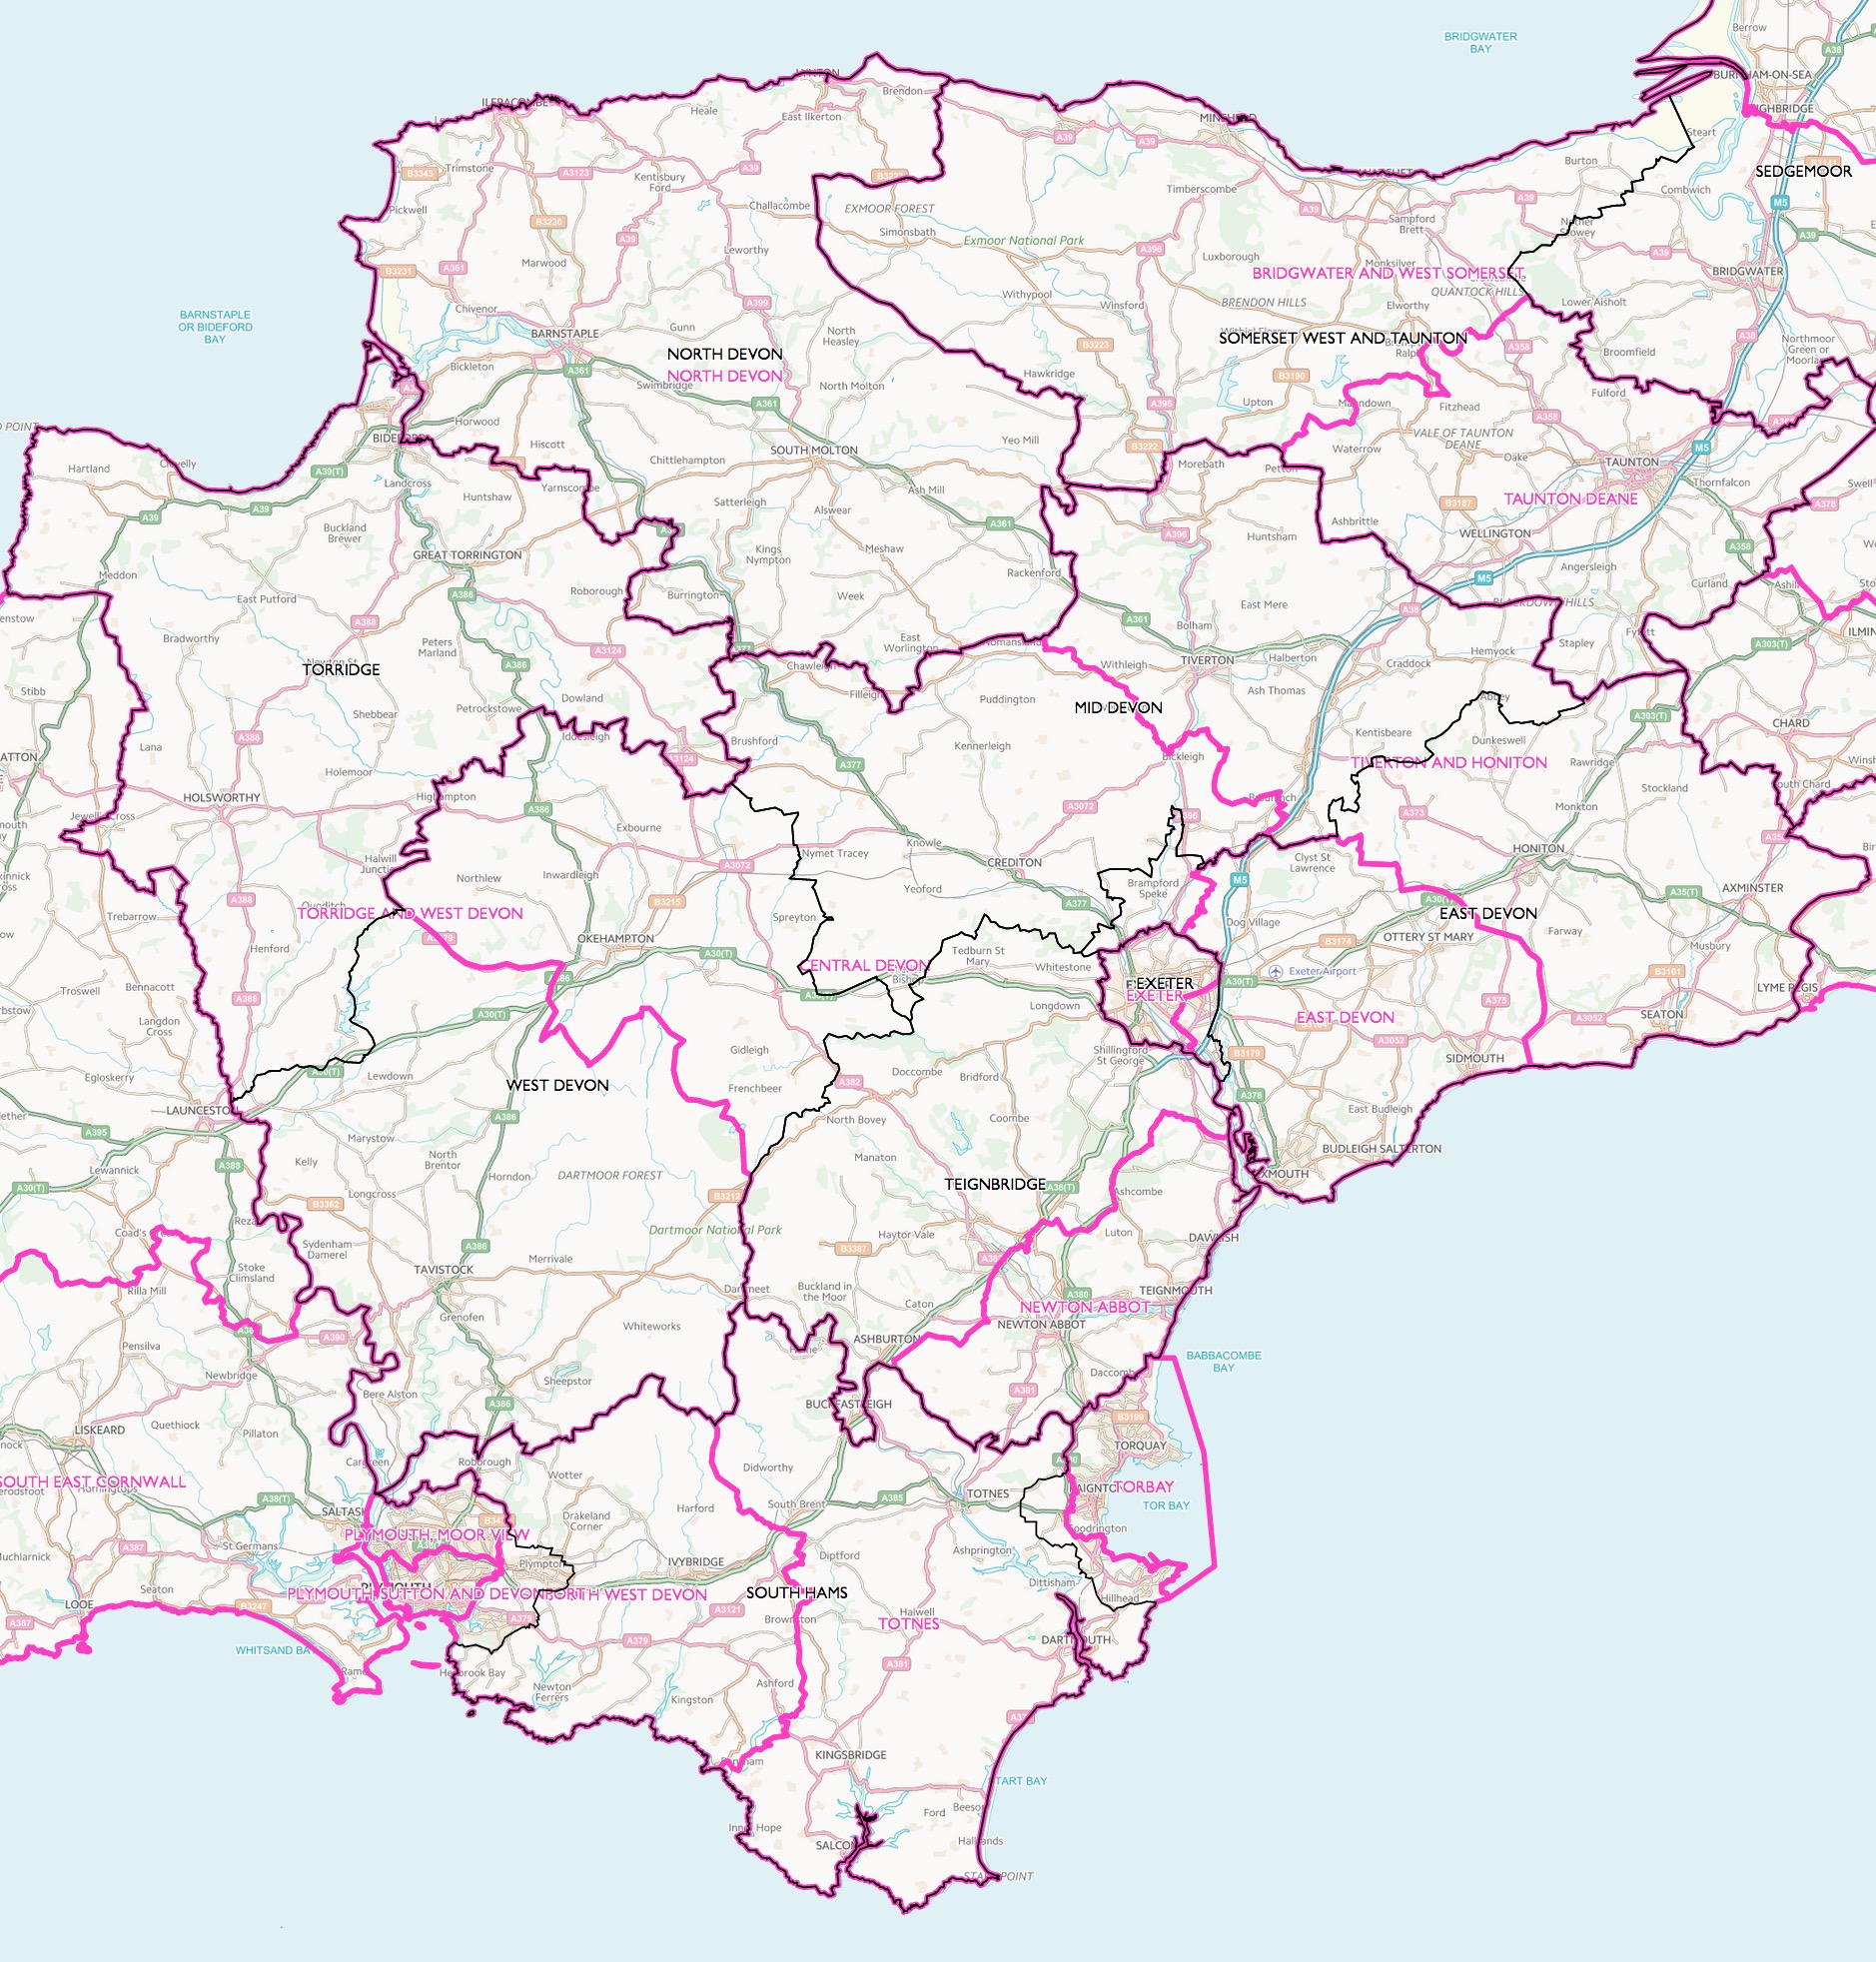 Devon parliamentary constituency and district council boundaries map